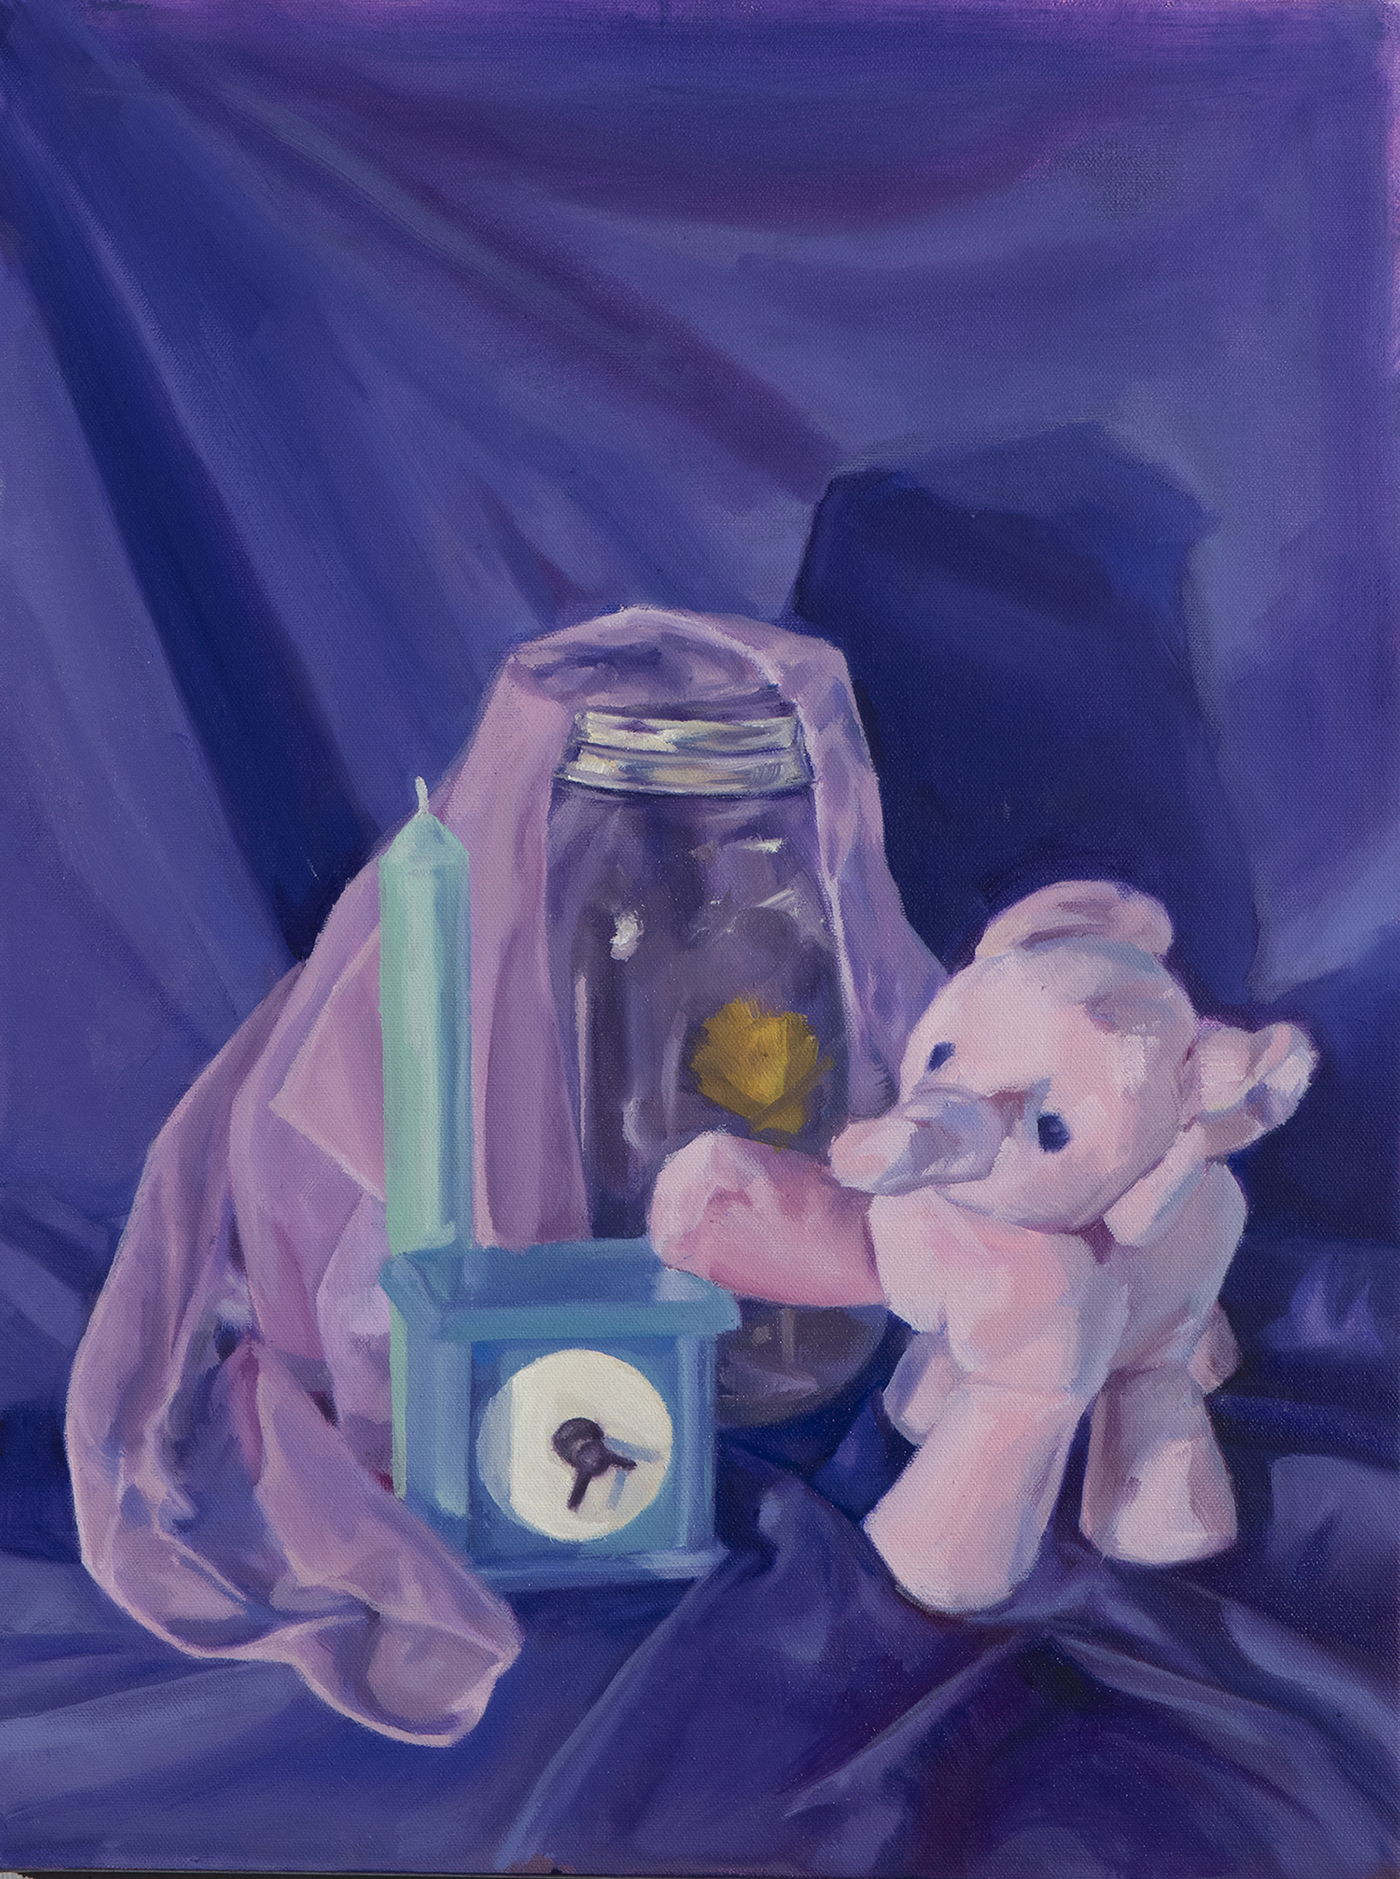 A still life painting of a stuffed animal elephant and other objects.